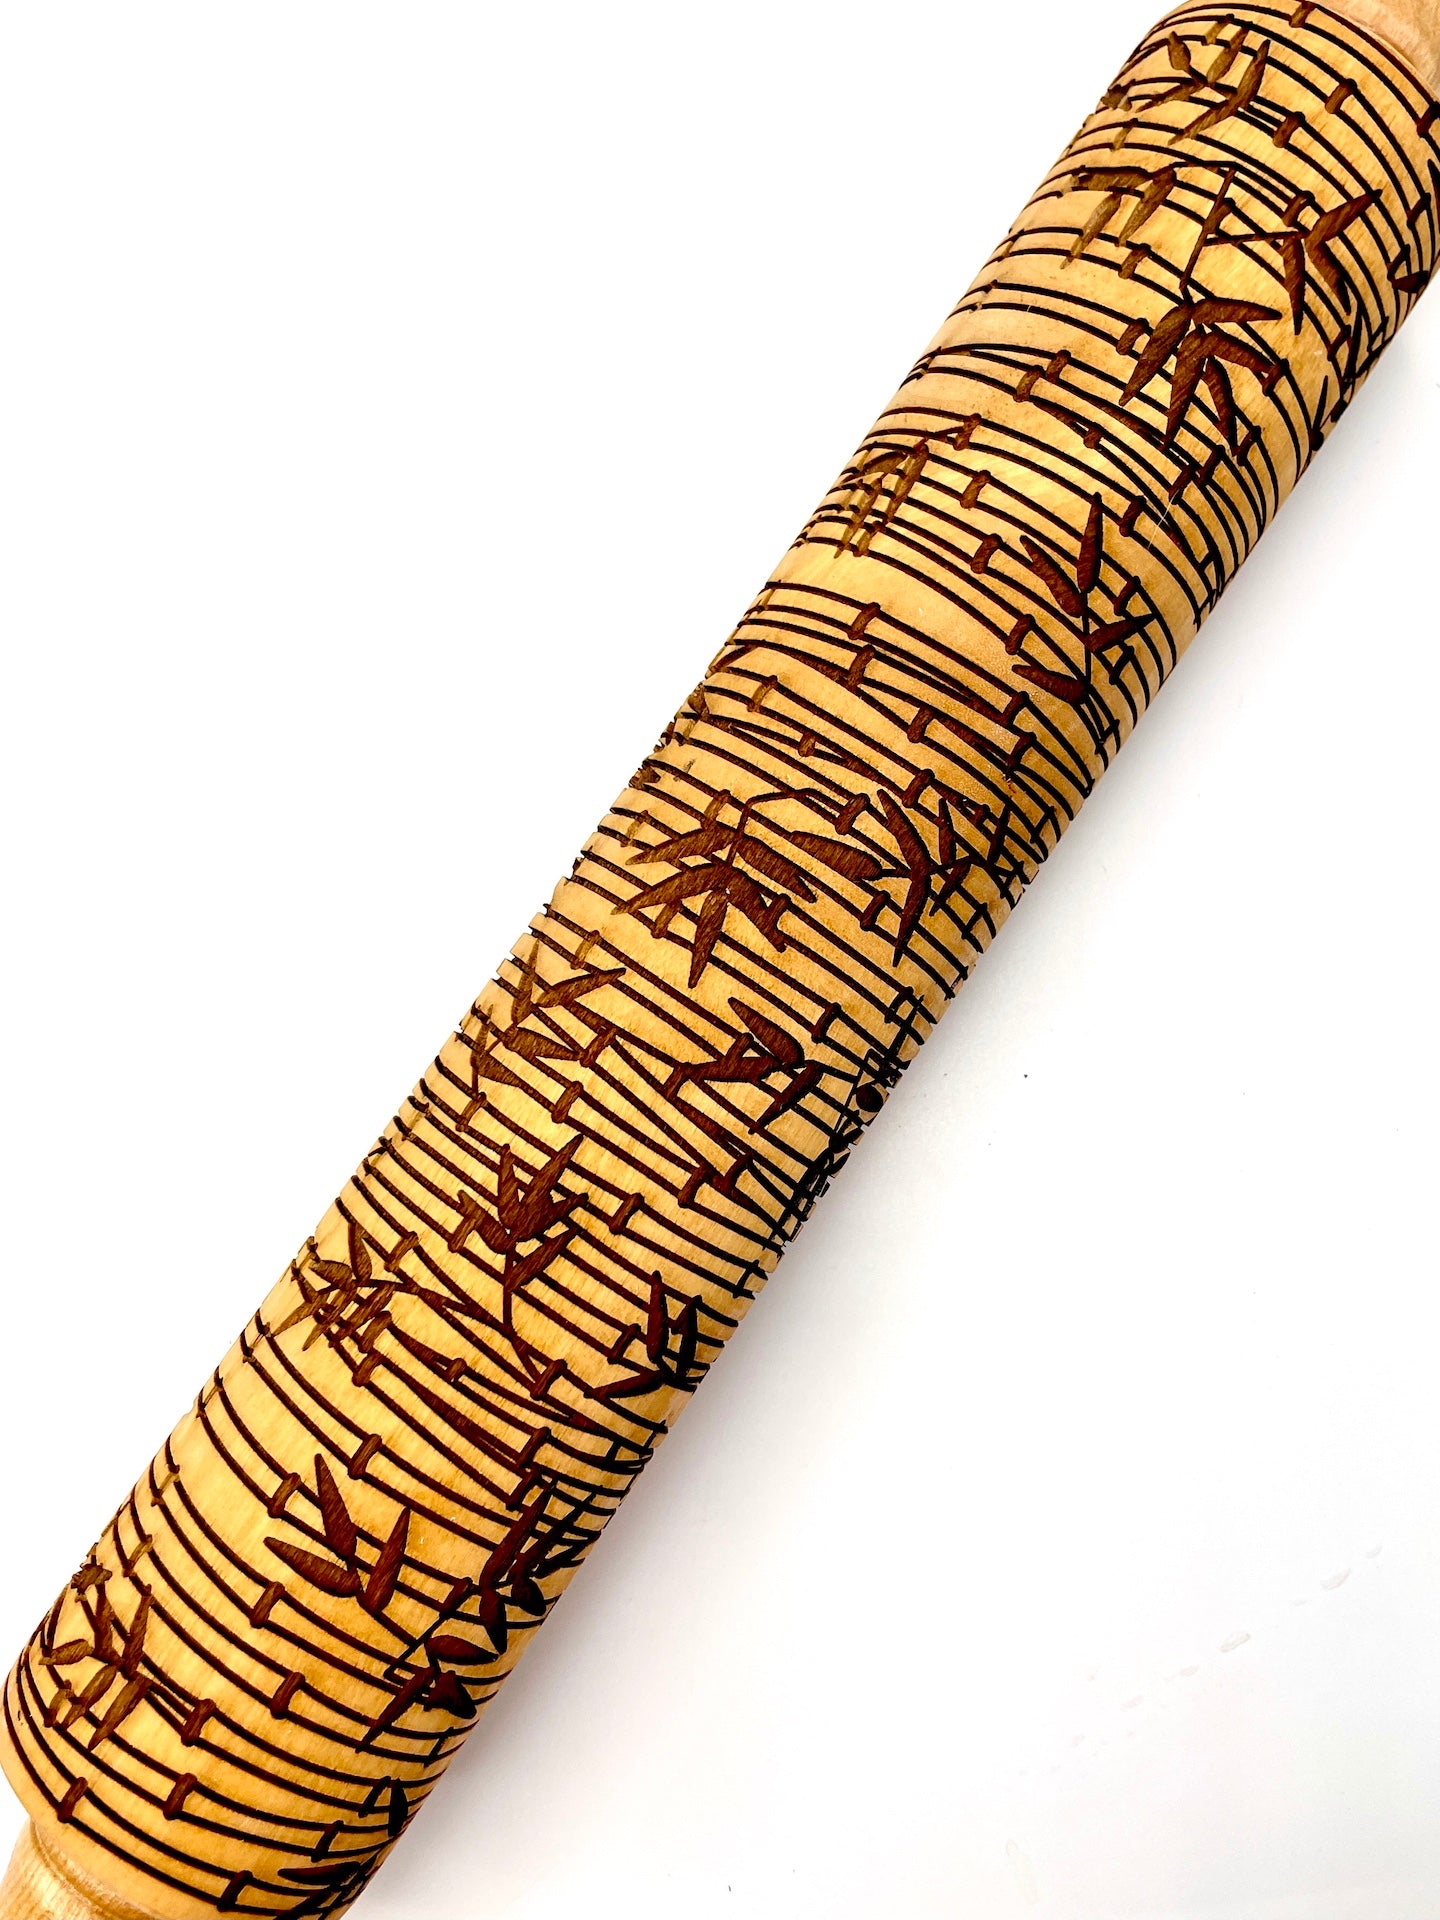 Bamboo Textured Rolling Pin